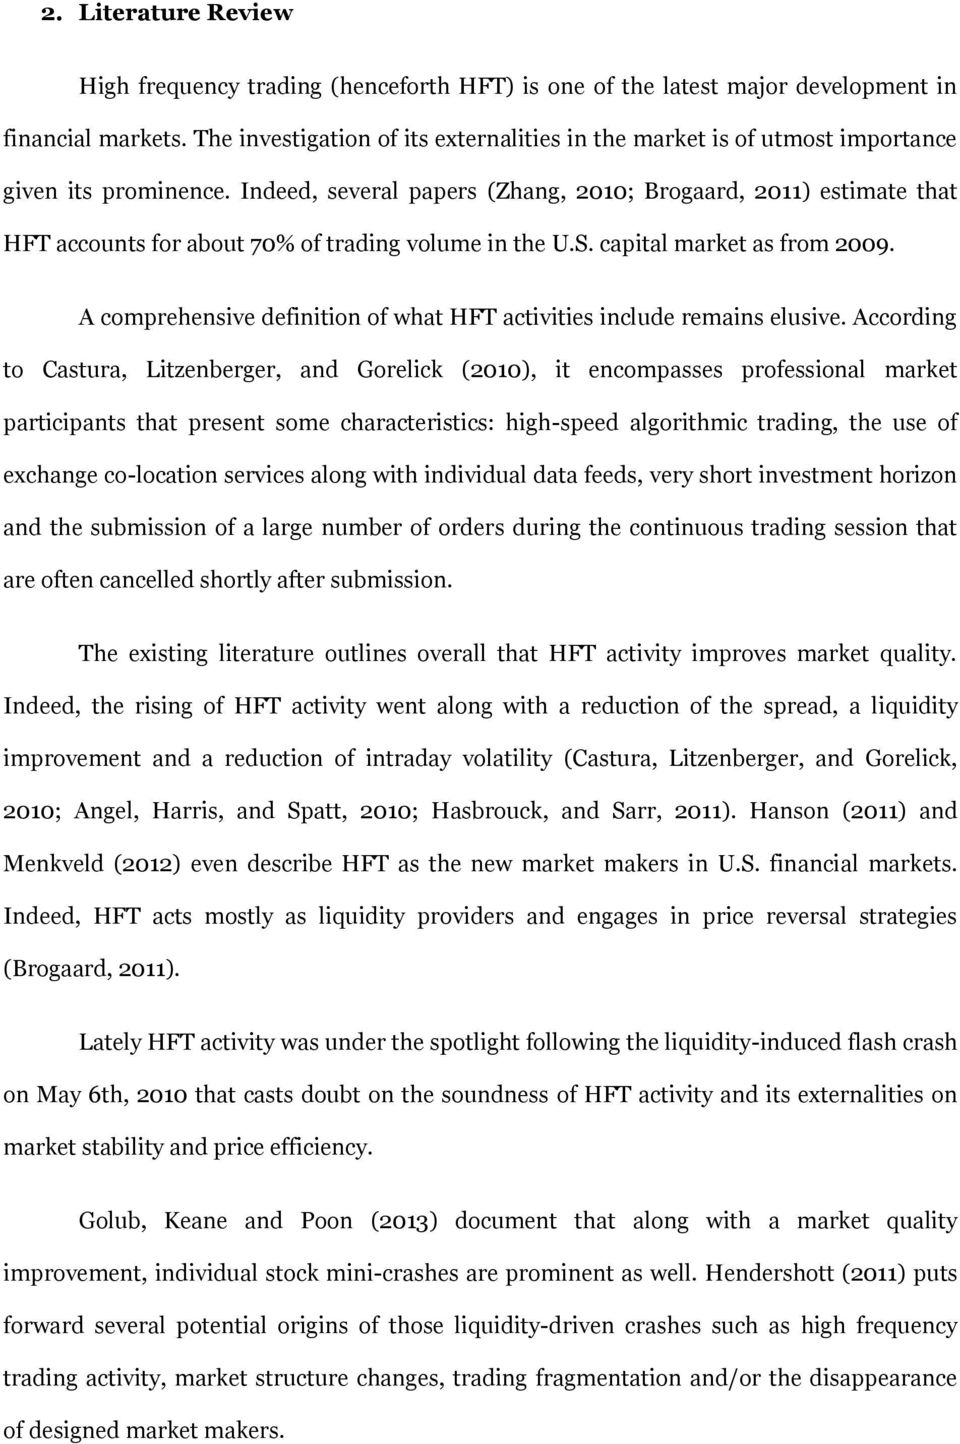 Indeed, several papers (Zhang, 2010; Brogaard, 2011) estimate that HFT accounts for about 70% of trading volume in the U.S. capital market as from 2009.